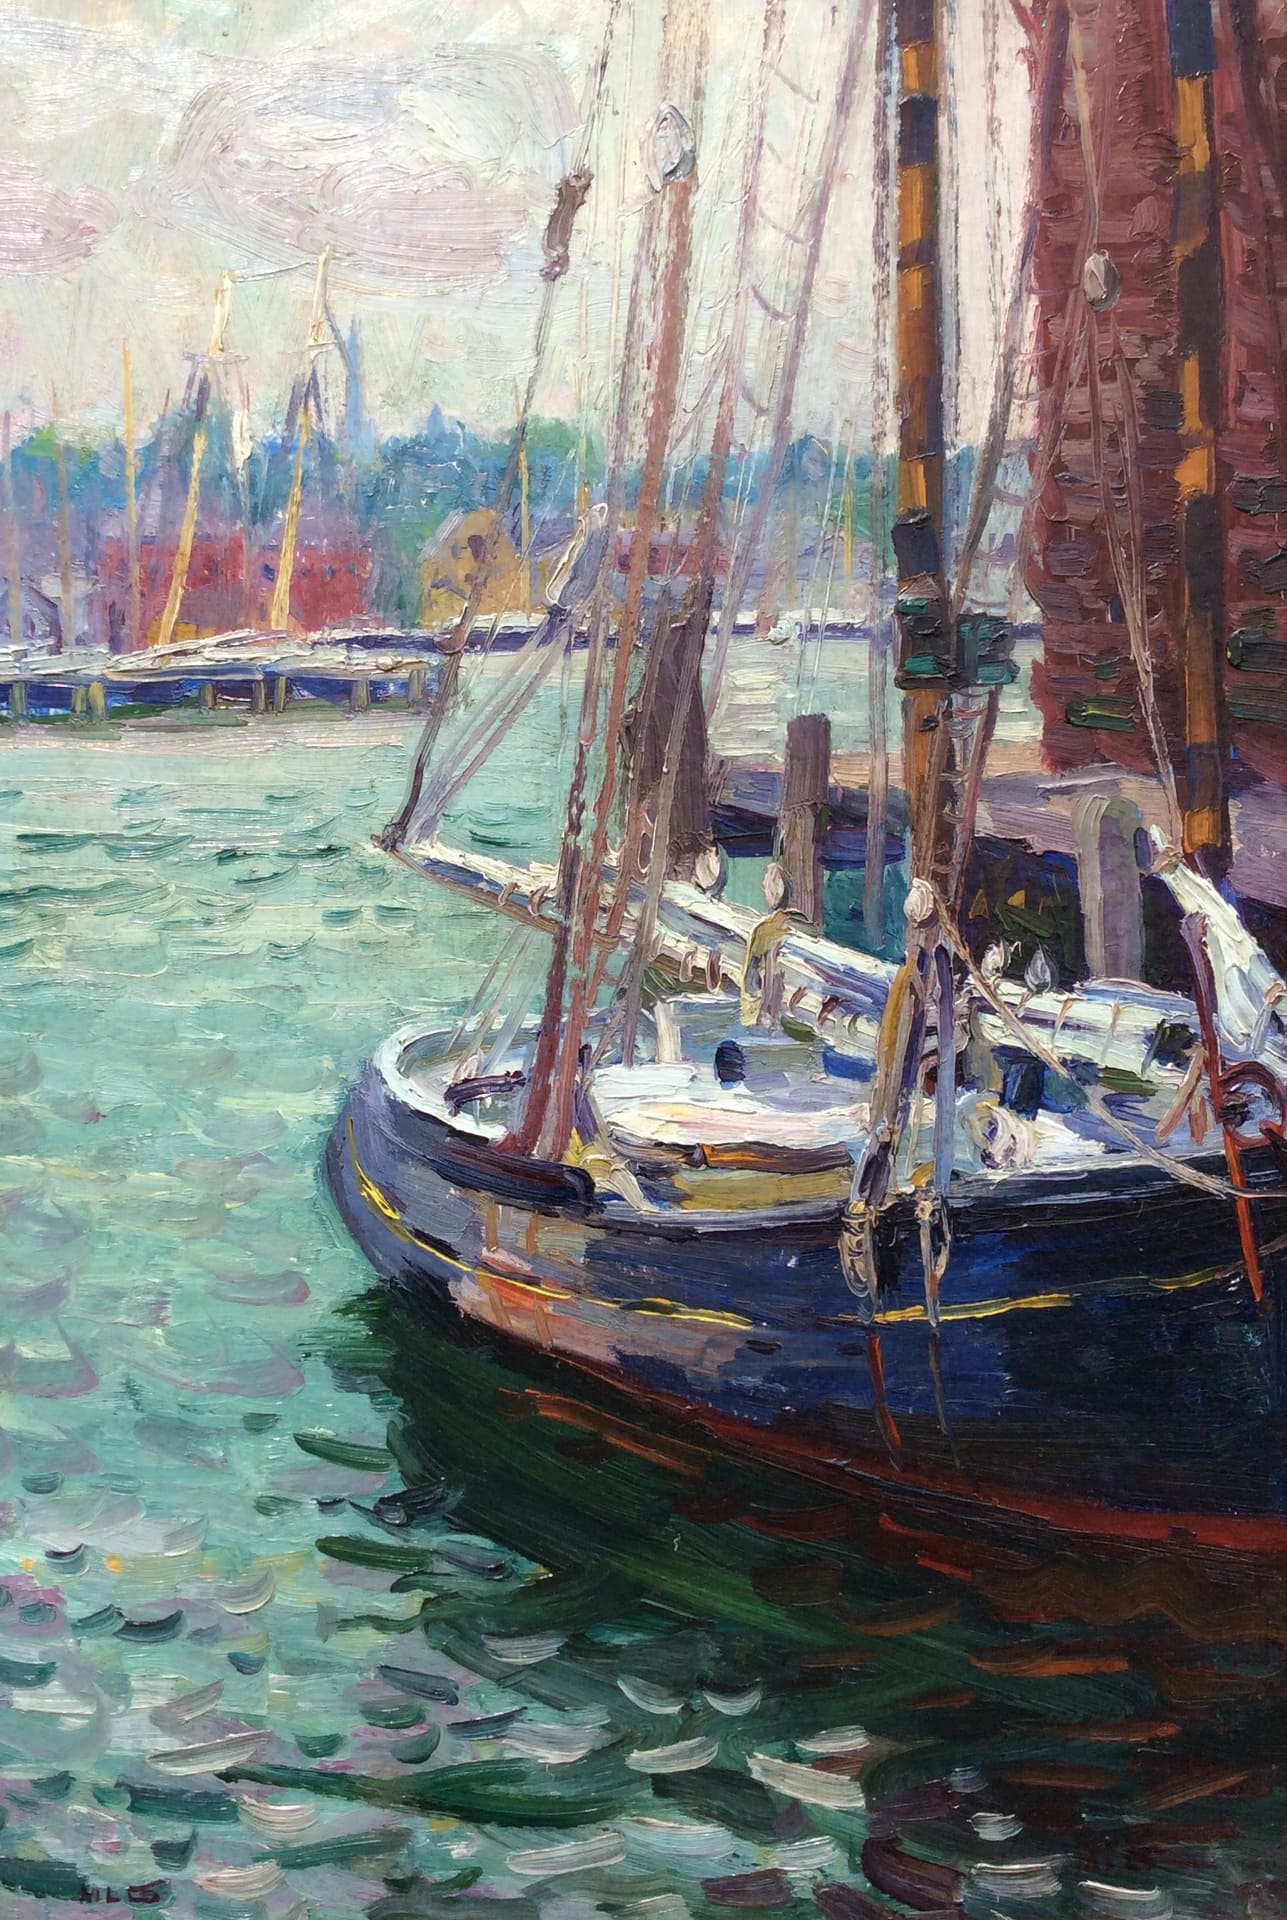 “Boats at Gloucester Wharf”